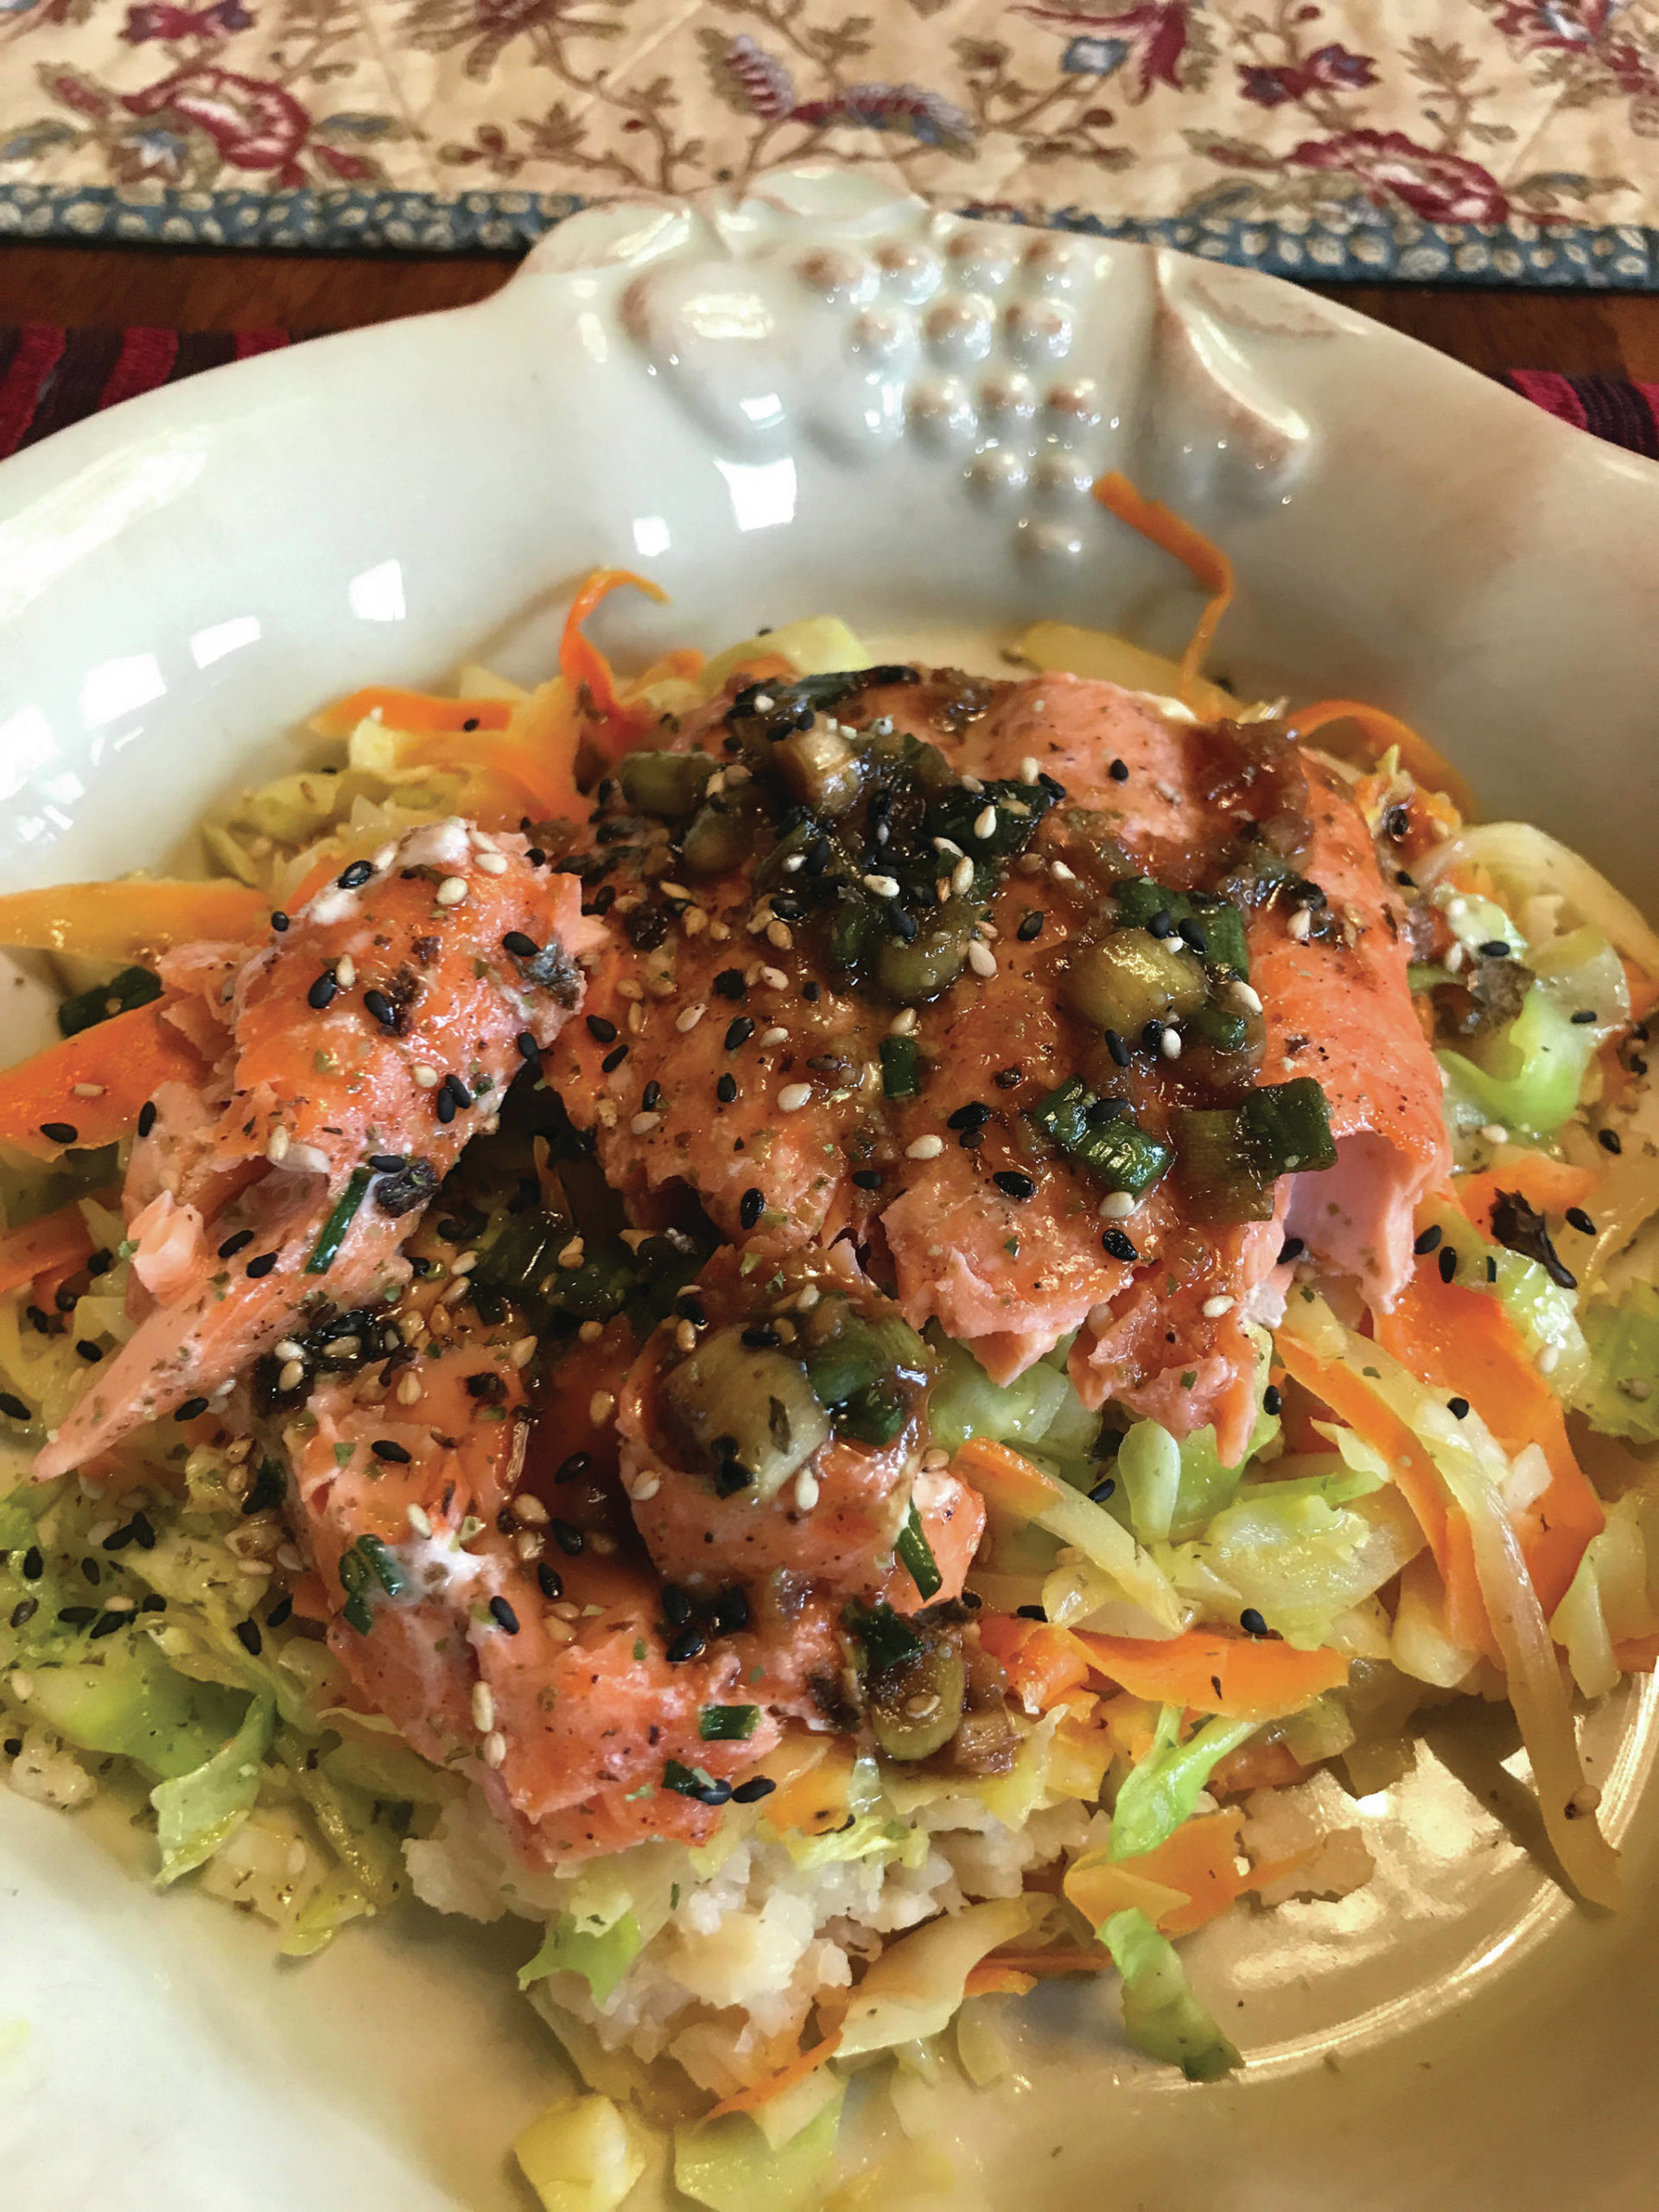 Roasted salmon with miso rice and ginger-scallion vinaigrette is seen here on Wednesday, June 24, 2020, in Teri Robl’s Homer, Alaska kitchen. (Photo by Teri Robl)